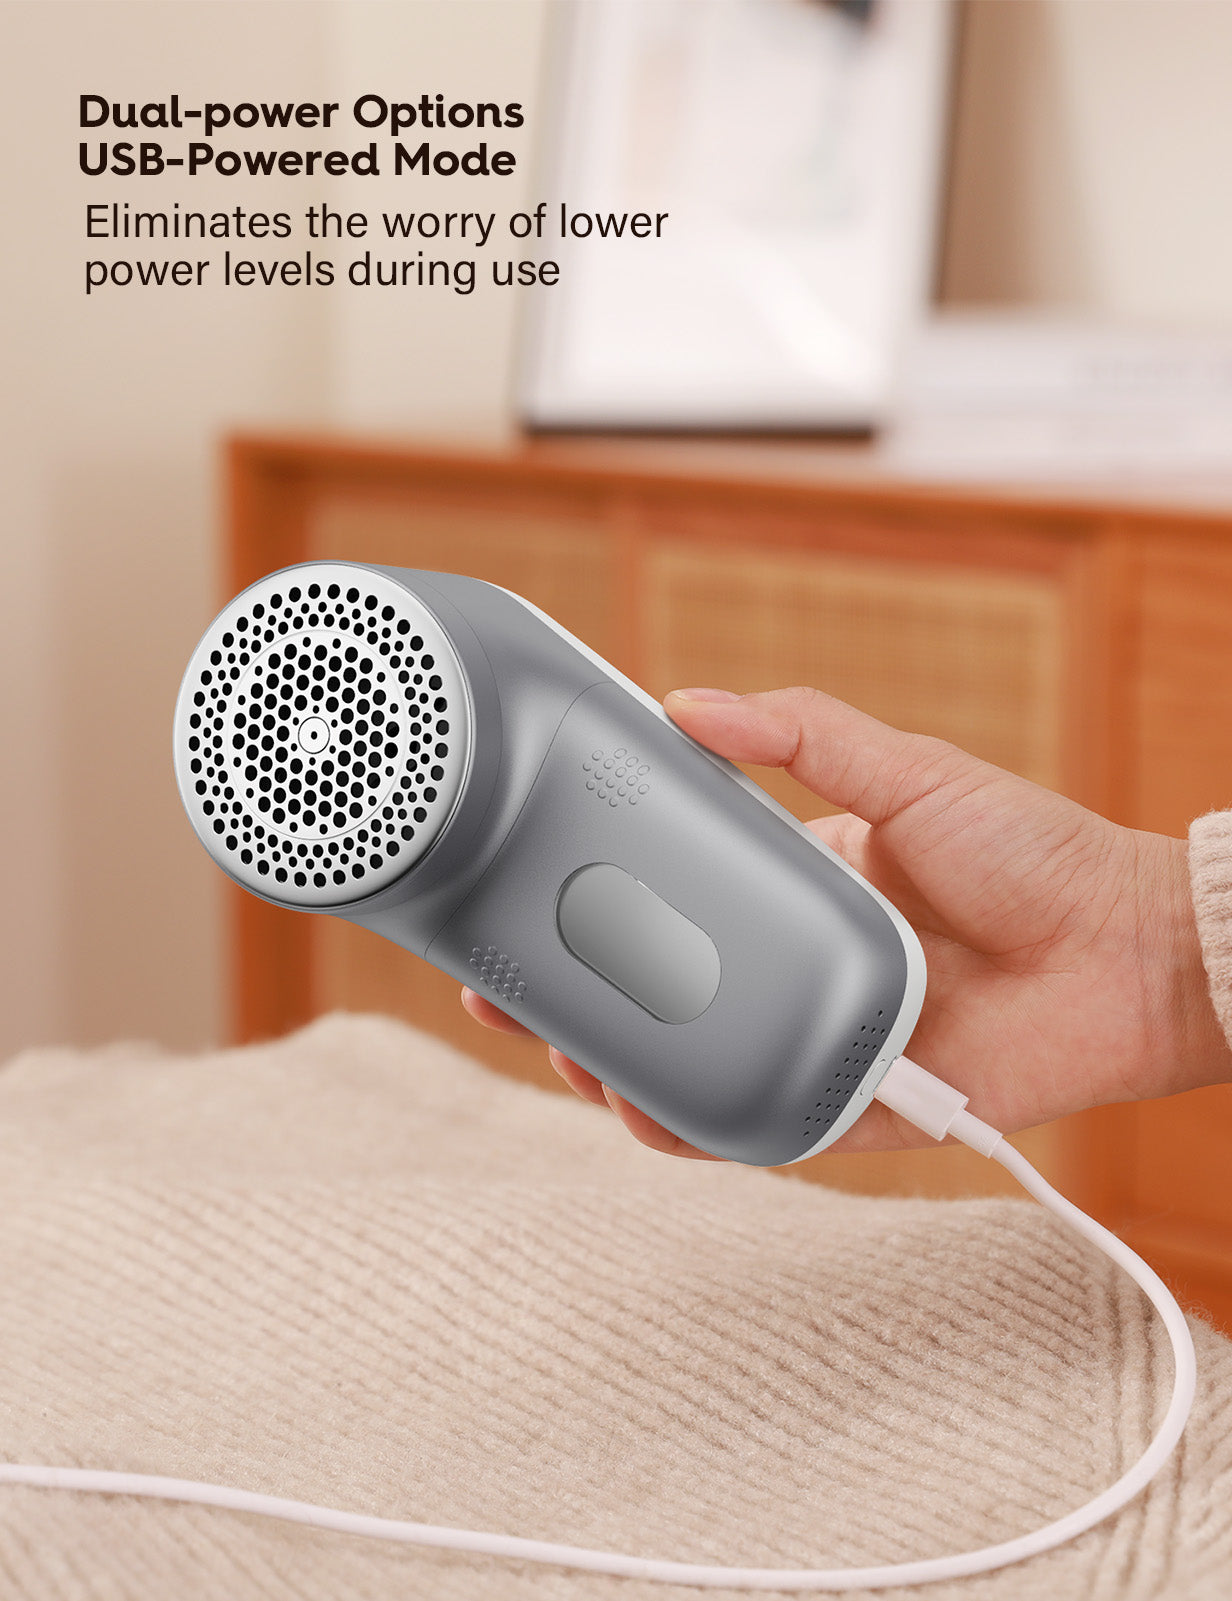 VASSON Dual-Power Fabric Shaver, USB-Powered Sweater Shaver, Battery Operated Portable Lint Shaver, Clothes Shaver, Lint Remover, Depiller, Defuzzer, Fabric Shaver for Furniture, Clothes, Couch